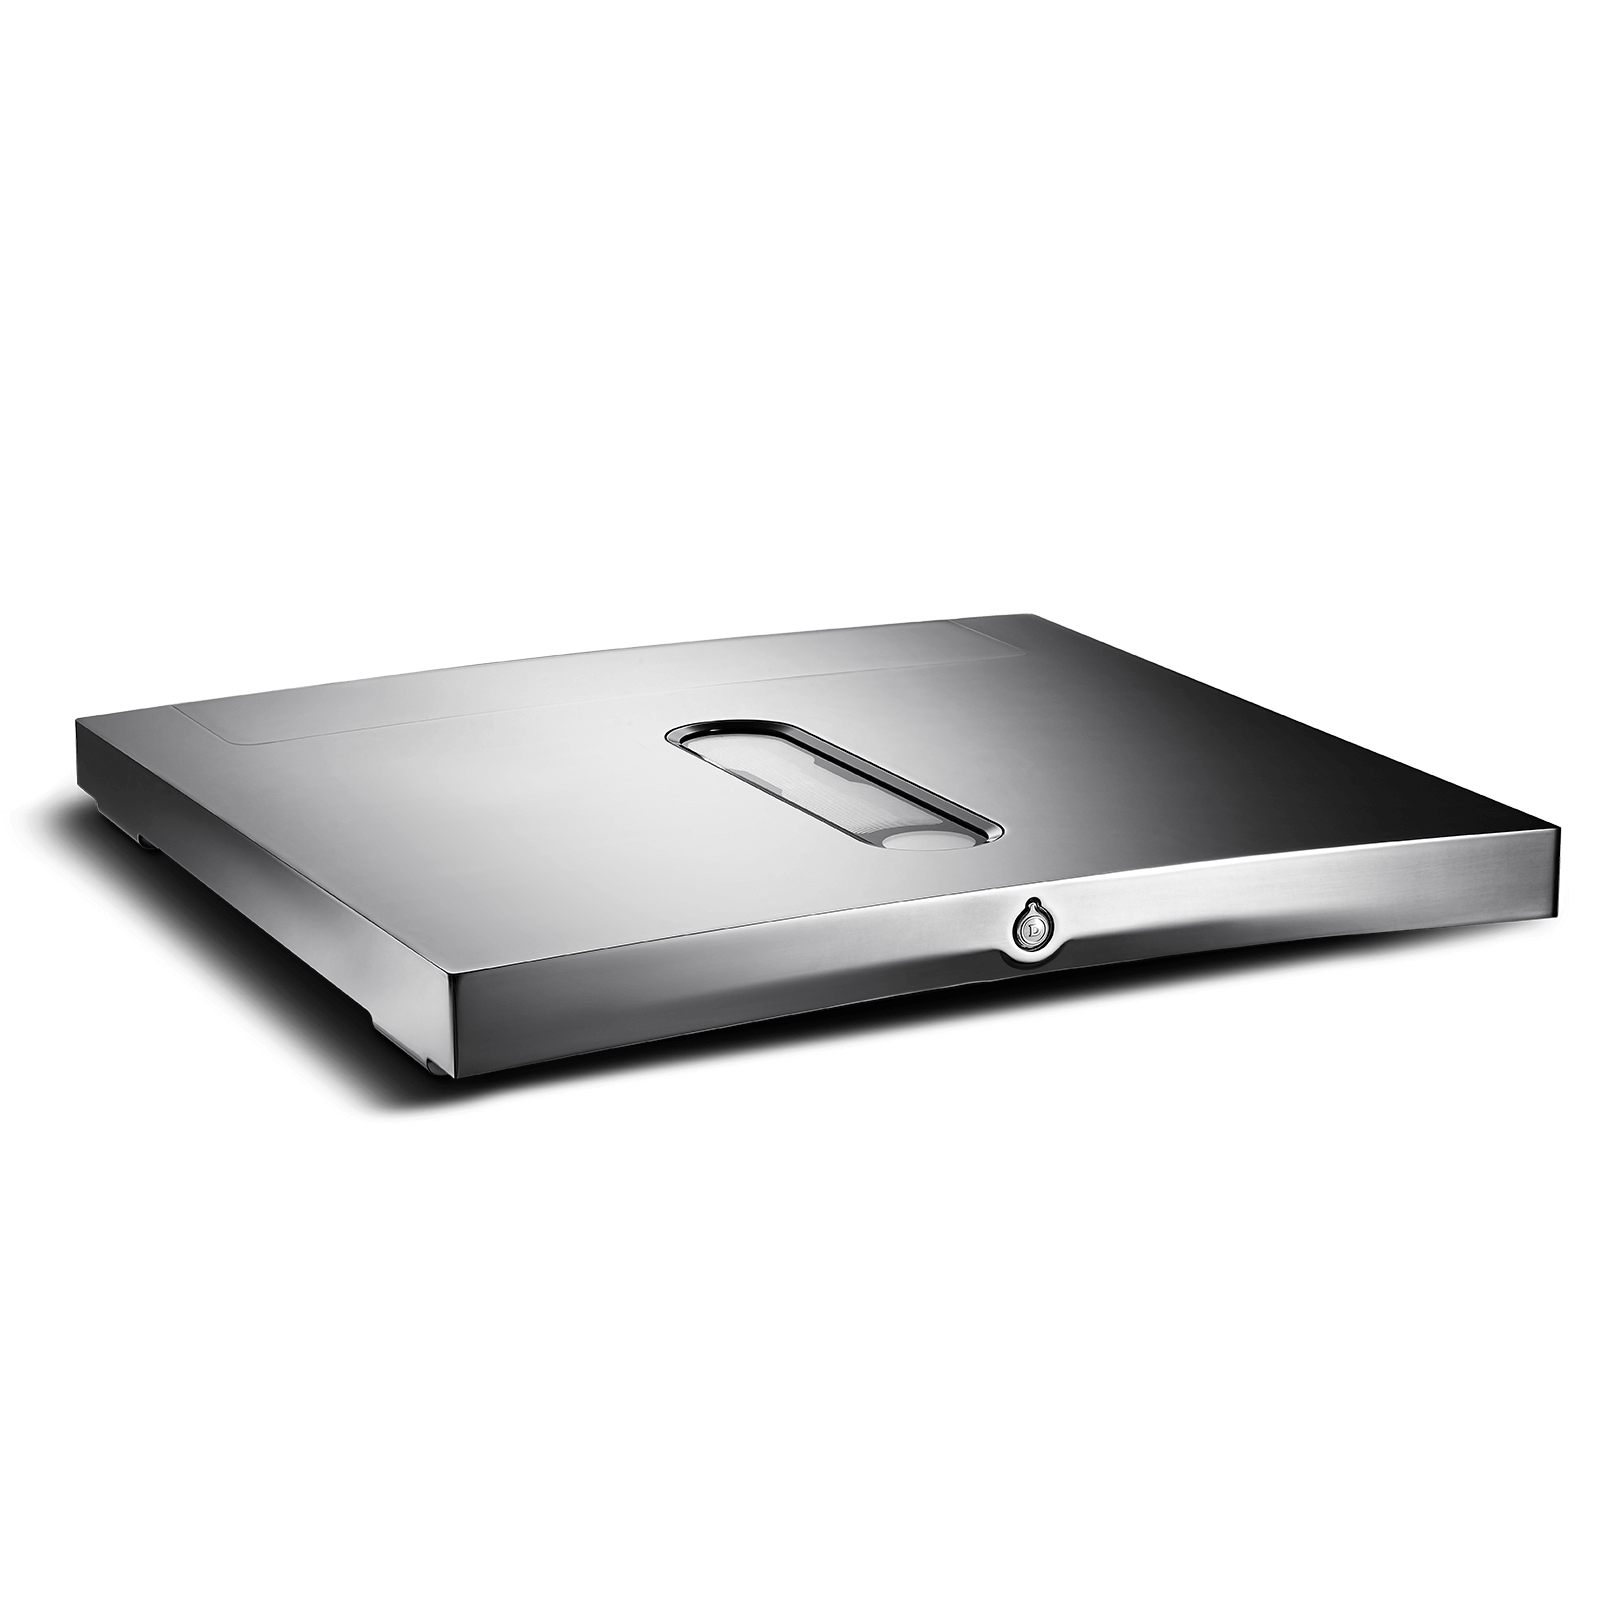 Amply Devialet Expert 250 Pro